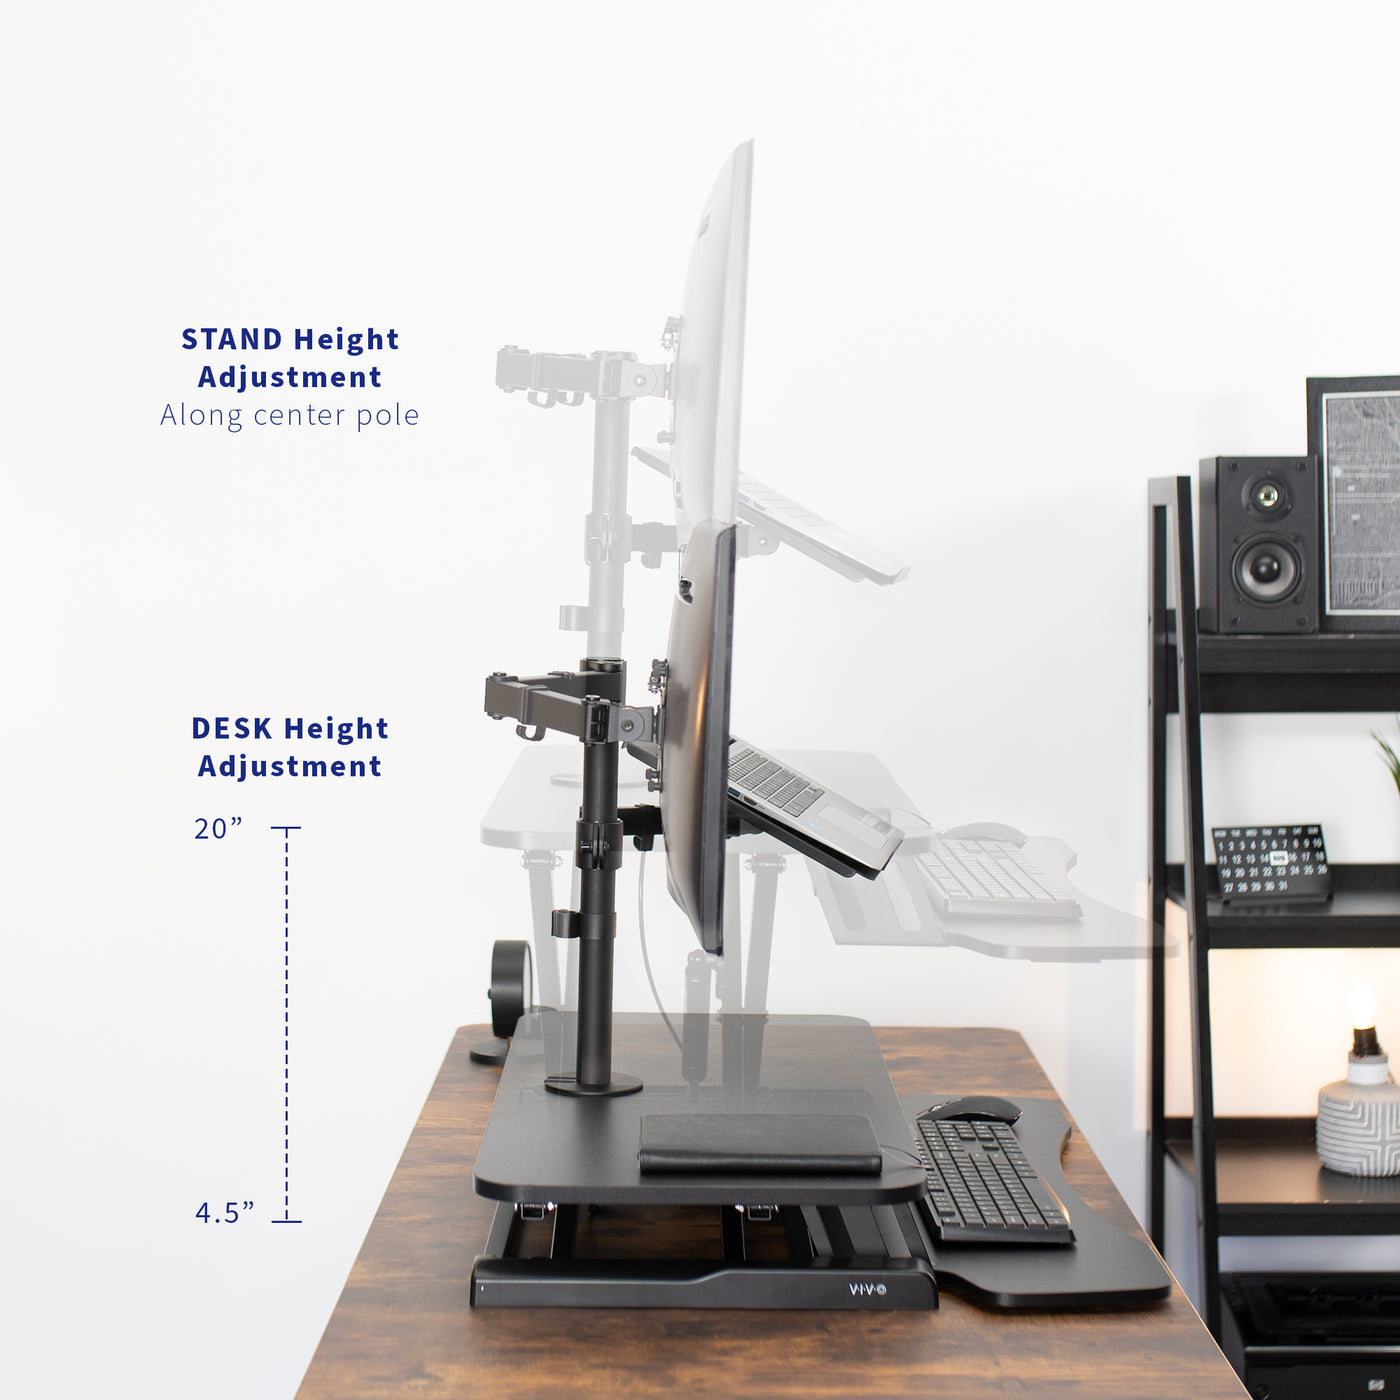 Height adjustment is also offered along the monitor mount pole as well as the desk riser height adjustments.